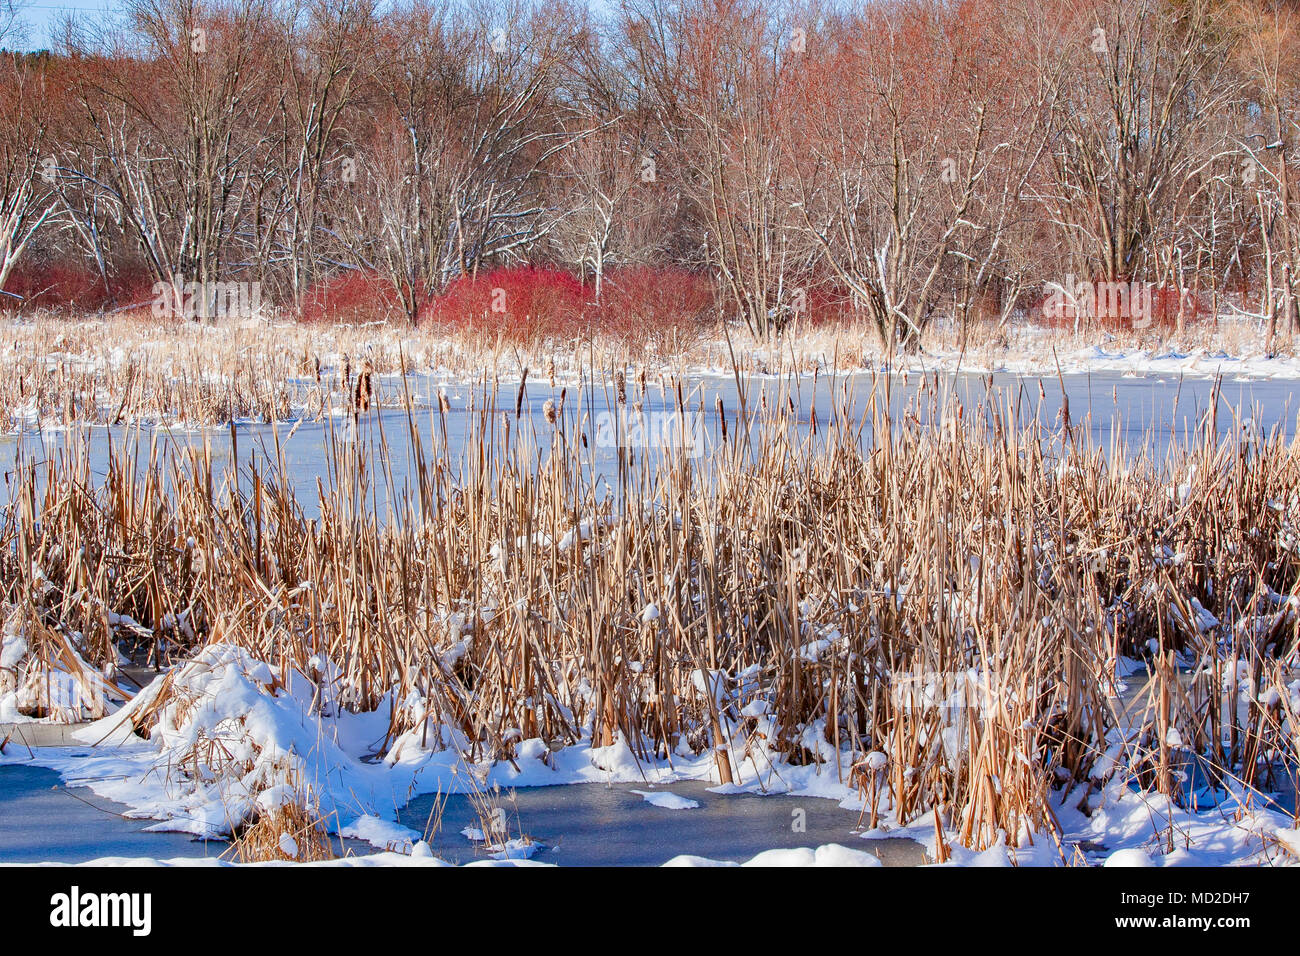 Bright red dogwood stands out in a snow covered wetland with cattails in the foreground and trees in the background. Stock Photo